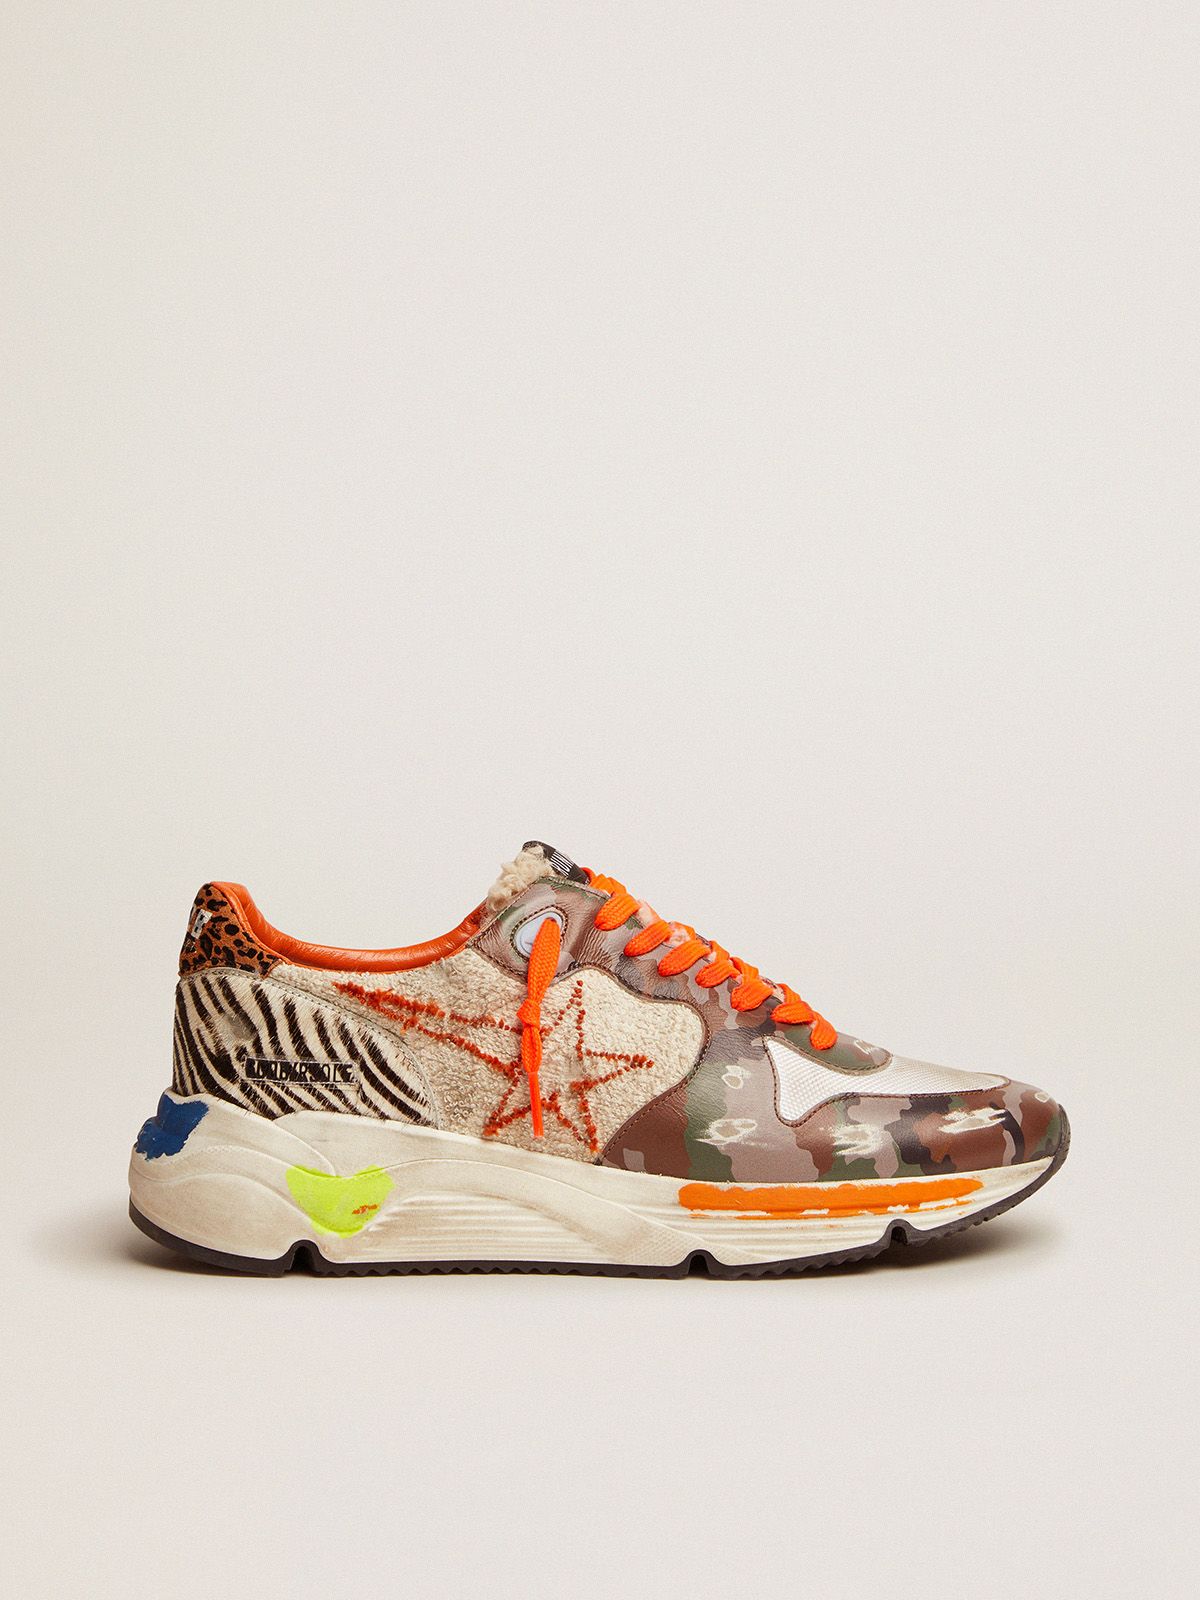 Running Sole sneakers with multi-print upper